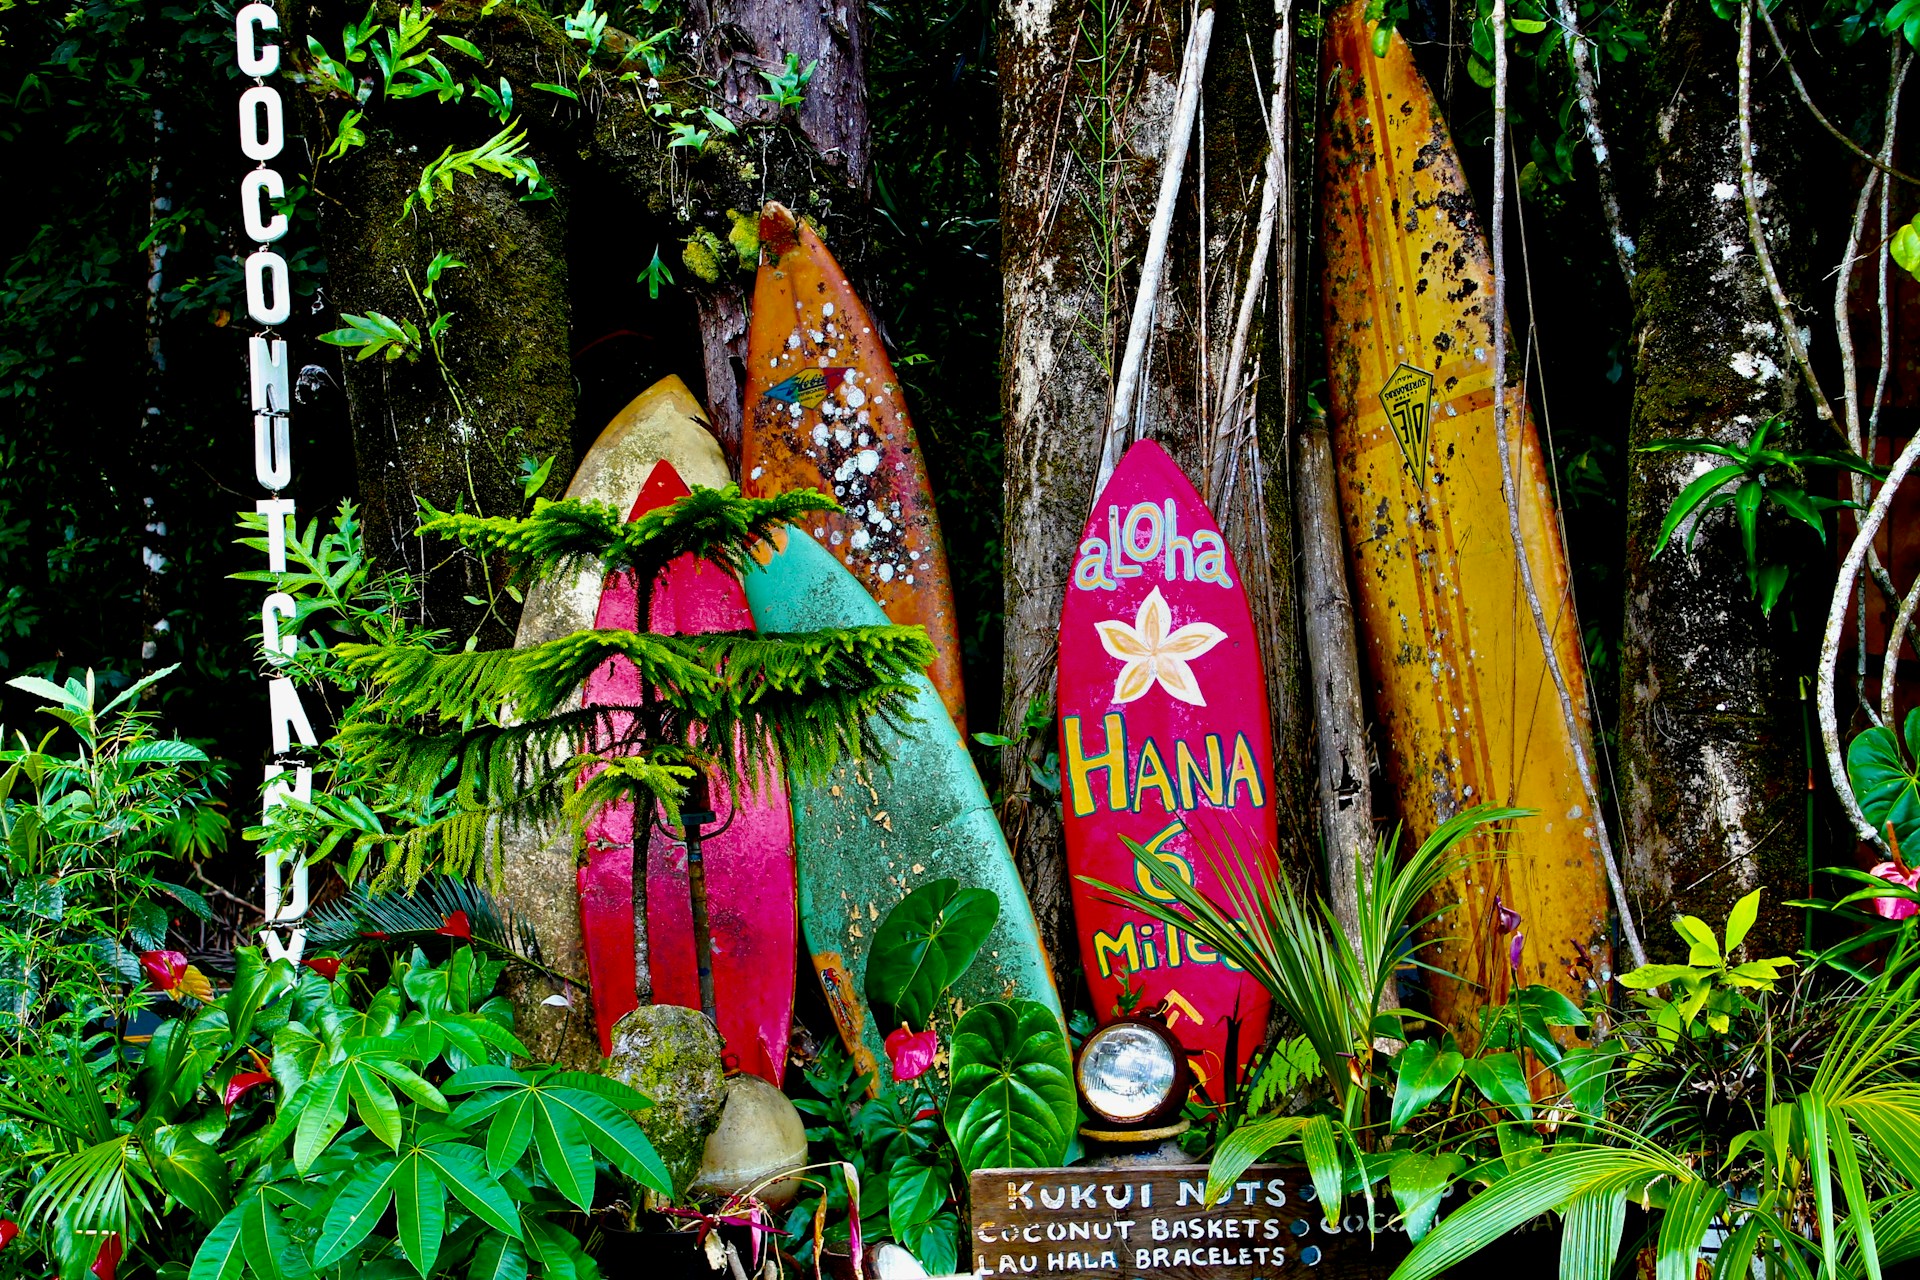 photo - hawaii surfboards stacked in the greenery